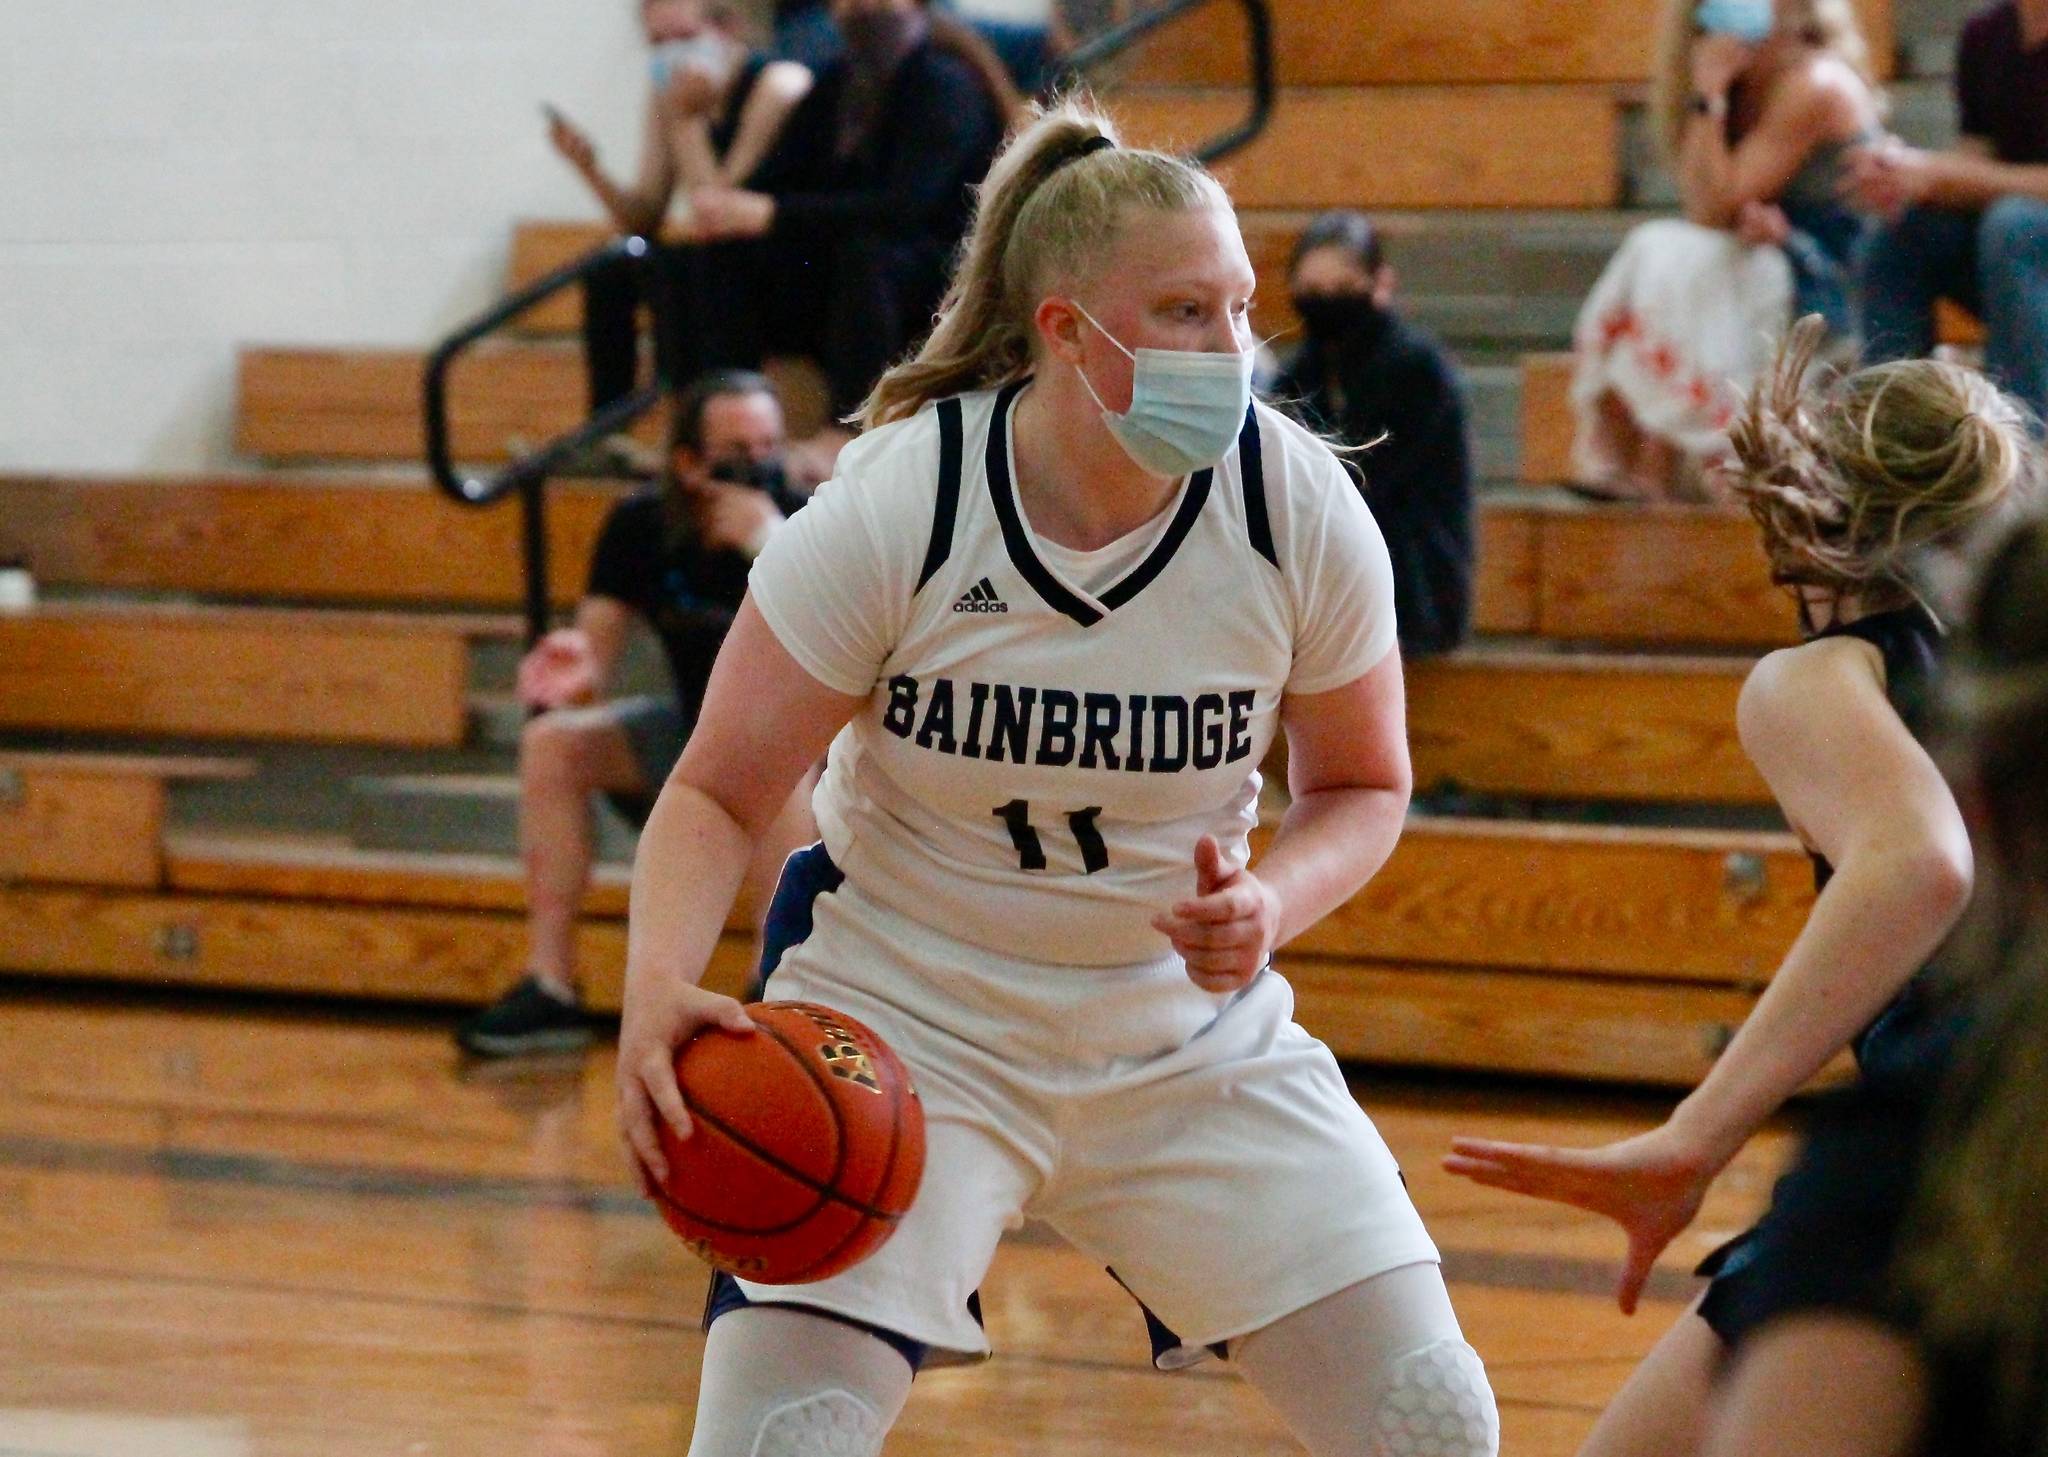 Anna Kozlosky scored 15 points in Bainbridge's game against Gig Harbor. Kozlosky is the team's leading scorer and had been averaging 13 points per game through her first four games. (Mark Krulish/Kitsap News Group)